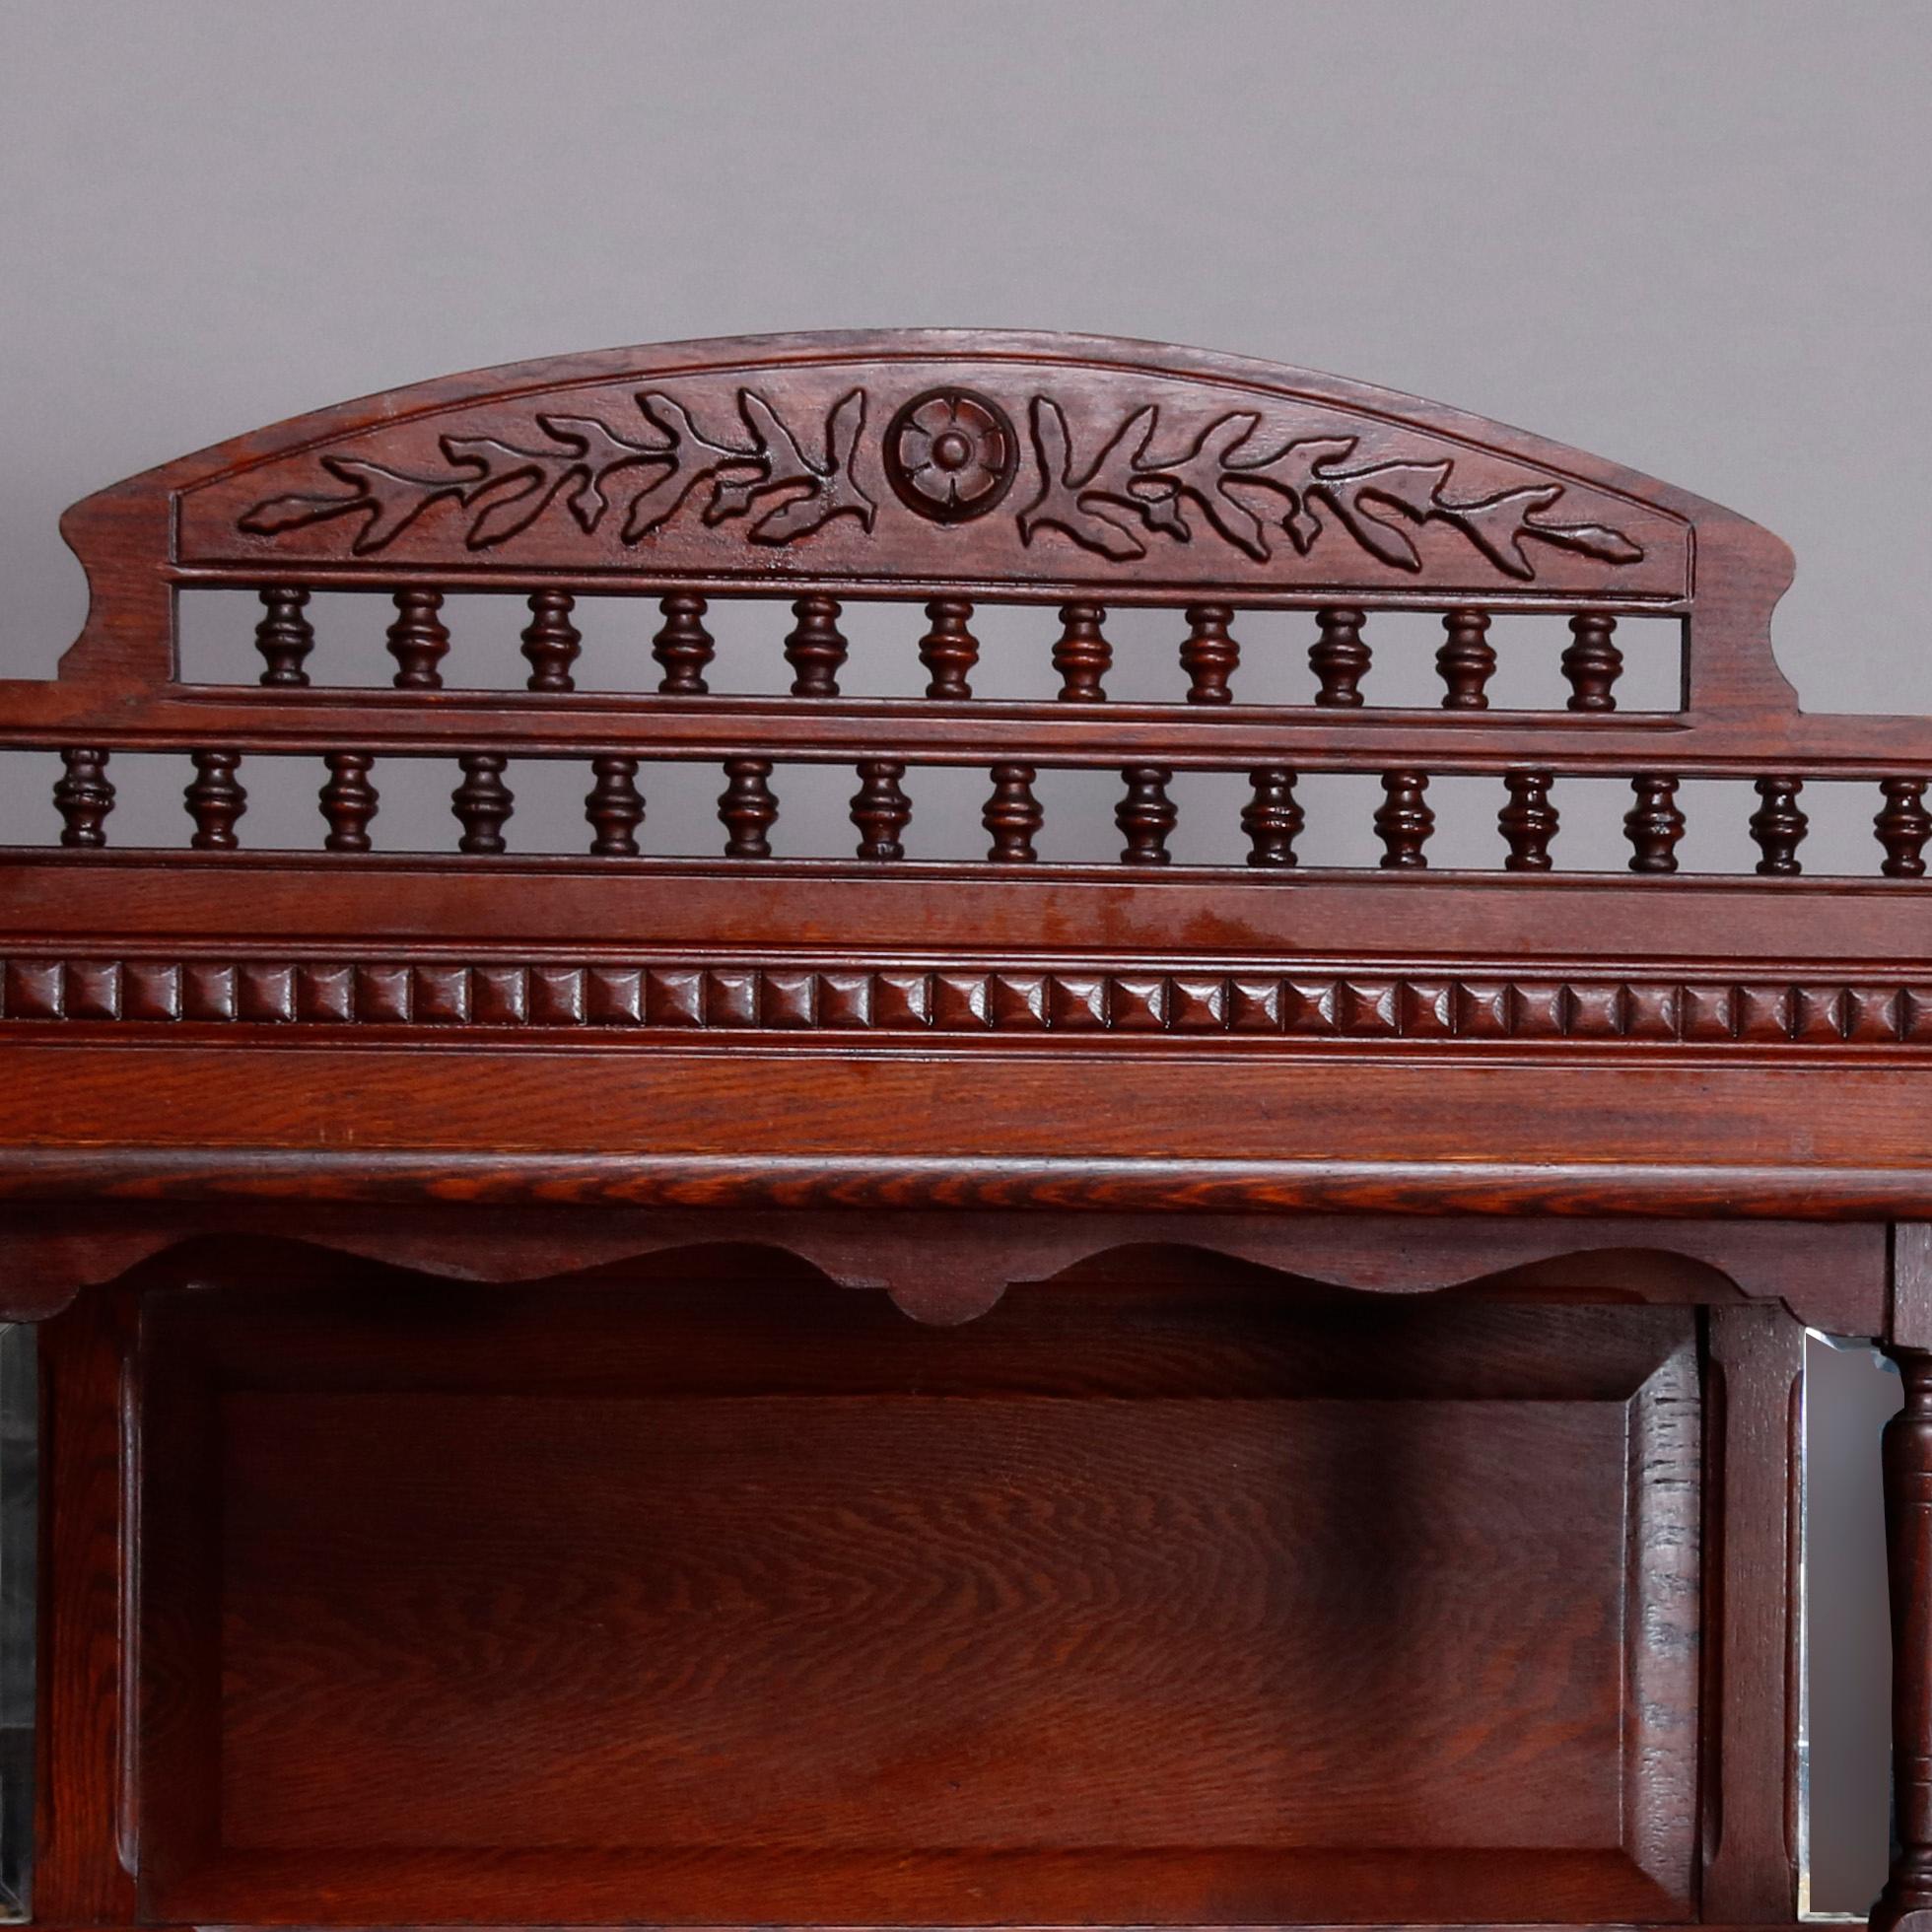 An antique stick and ball form Victorian carved oak bookcase offers foliate carved crest surmounting display shelf with mirrored back over enclosed bookcase having double glass doors, circa 1910.

***DELIVERY NOTICE – Due to COVID-19 we have